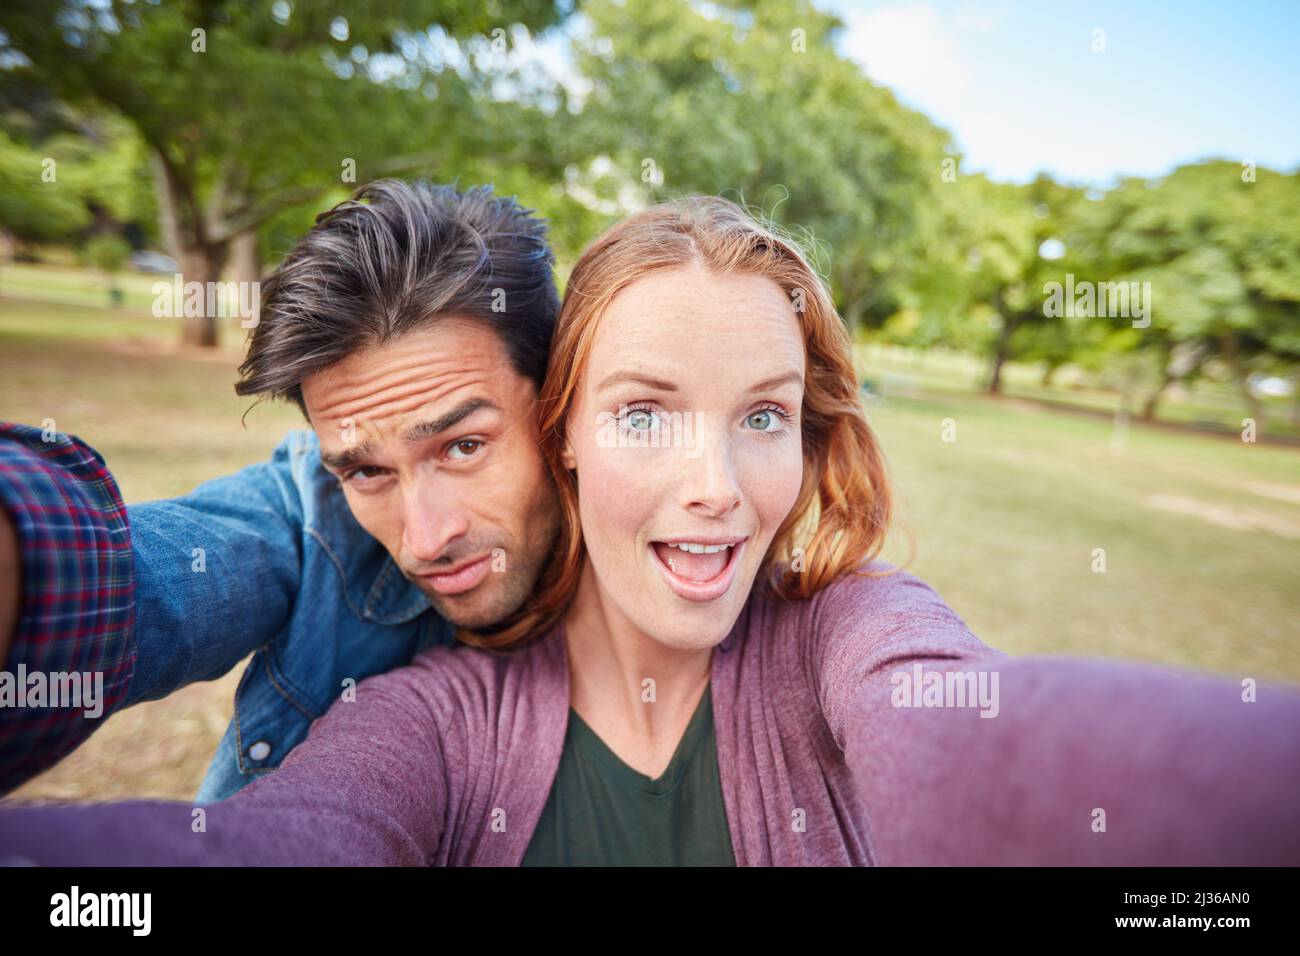 We still fall in love every day. Portrait of a young couple taking a selfie while out at the park. Stock Photo